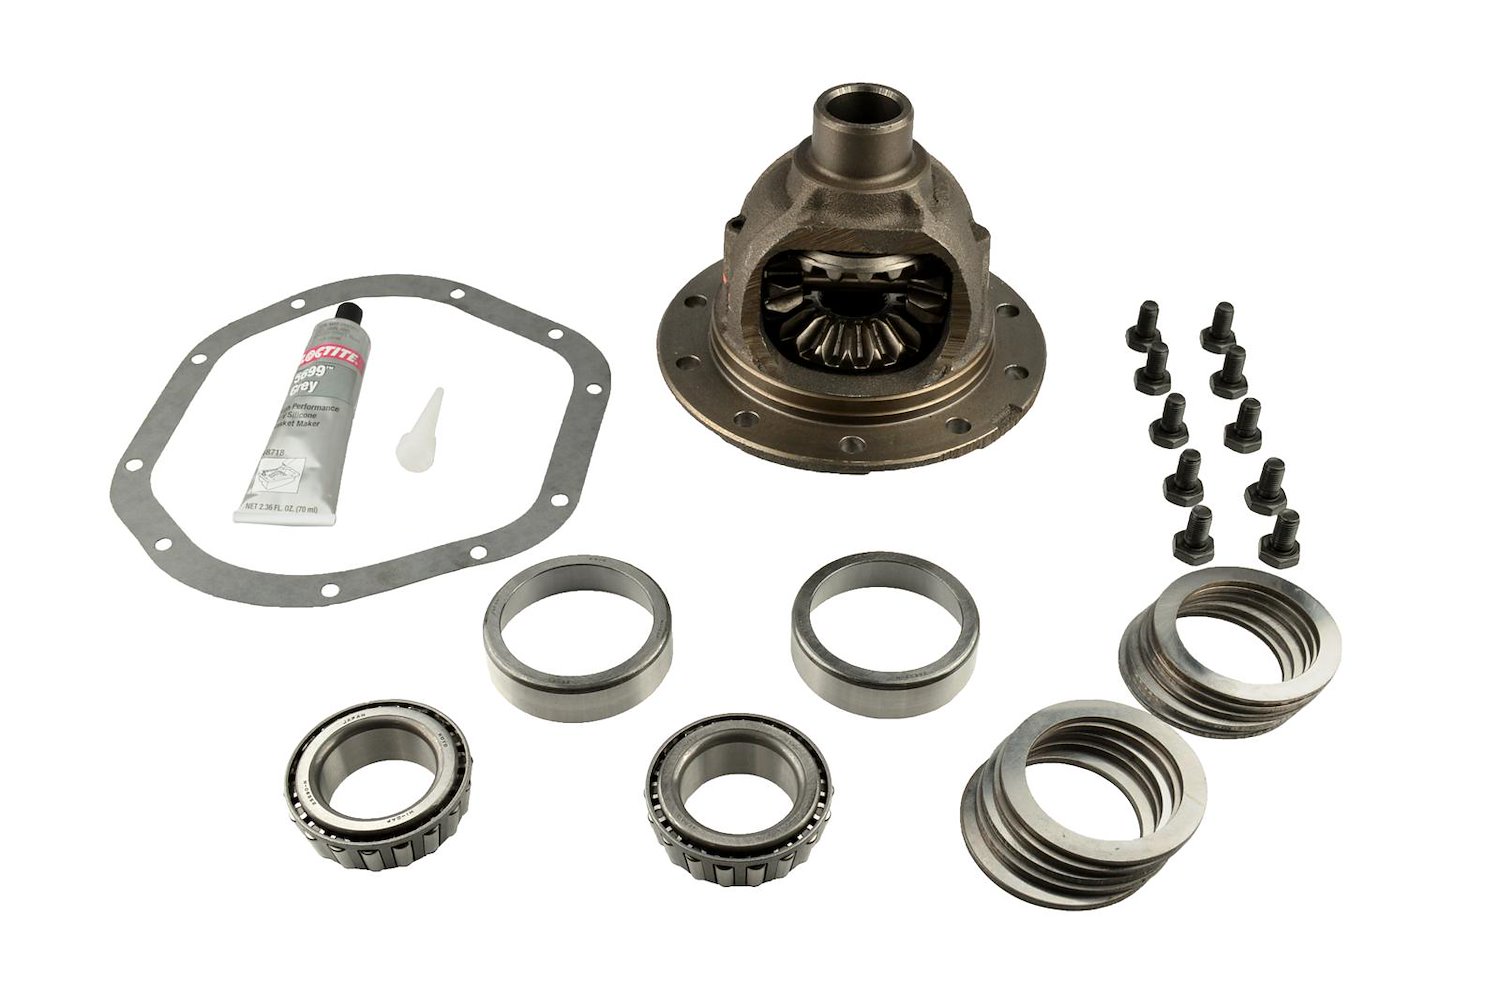 SPICER DIFFERENTIAL CARRIER CASE KIT - LOADED ASSY. DANA 44 FRONT LIMITED SLIP 3.73 & DOWN